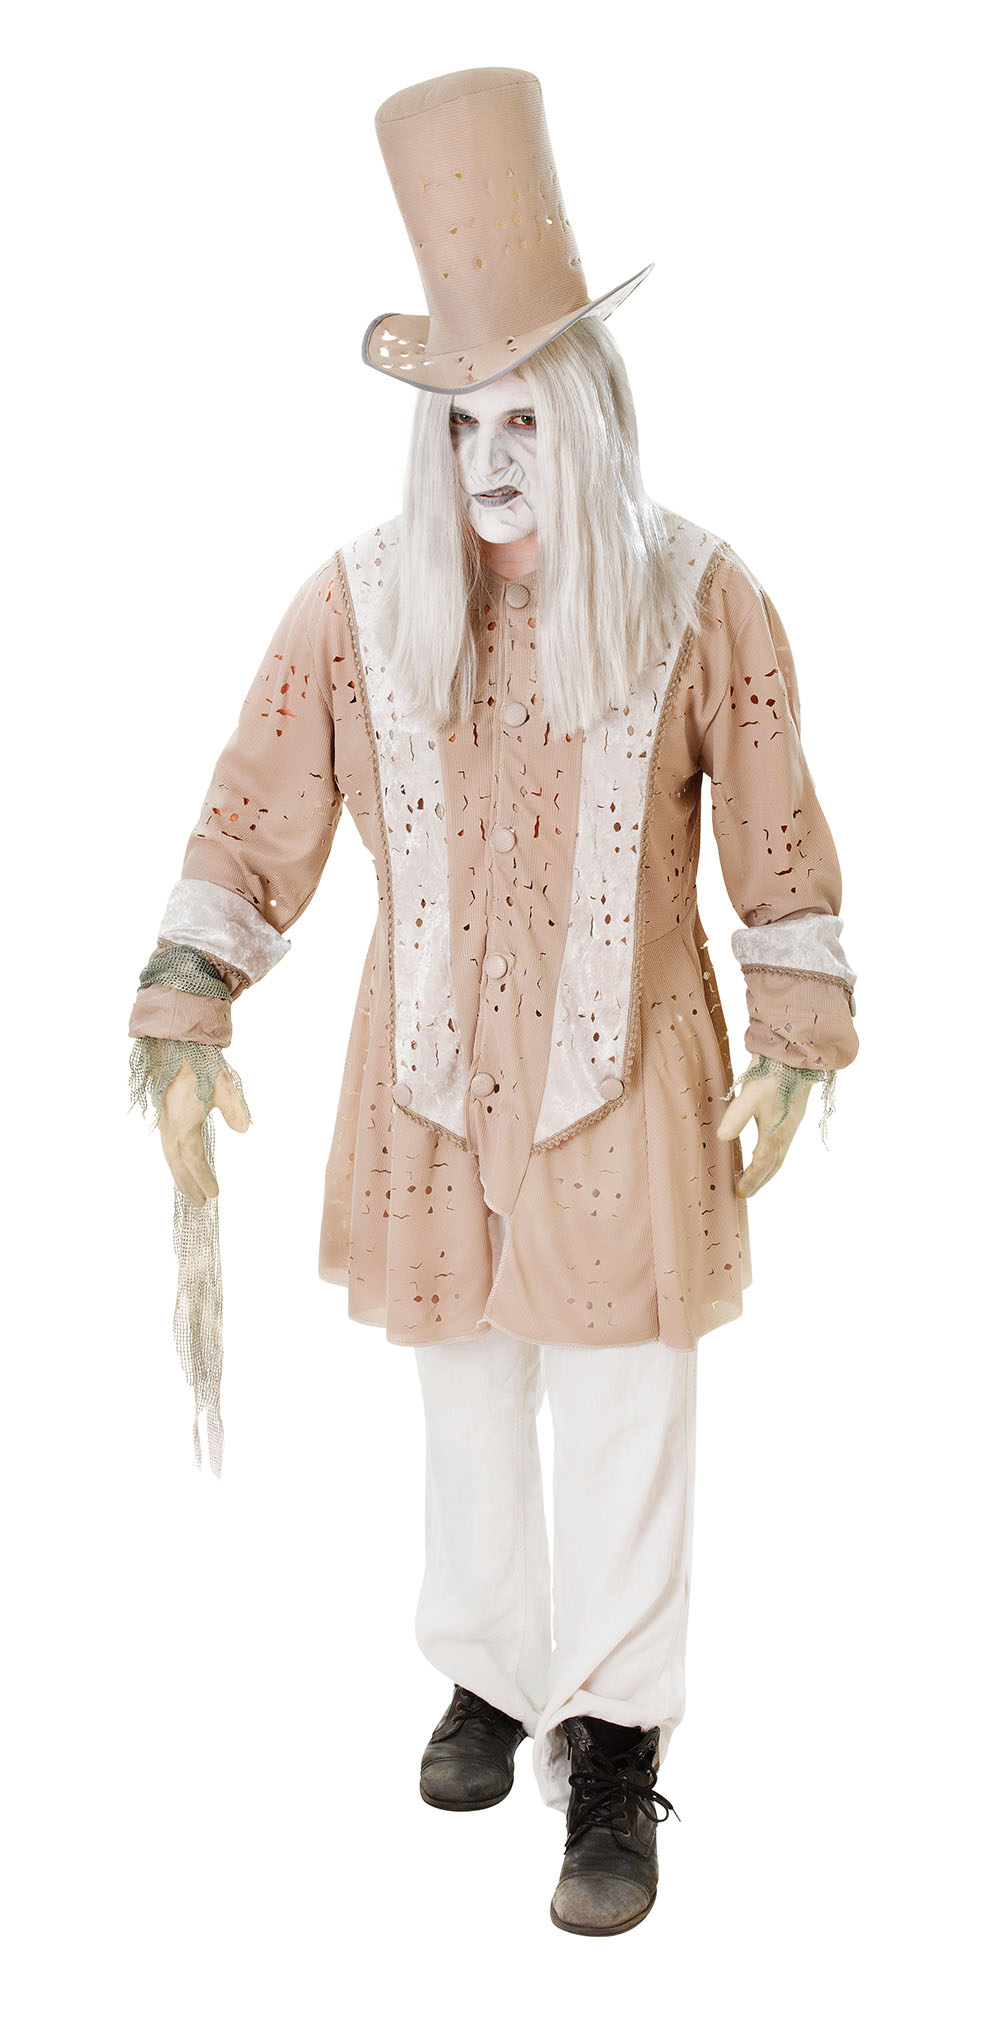 Ghostly Man Costume